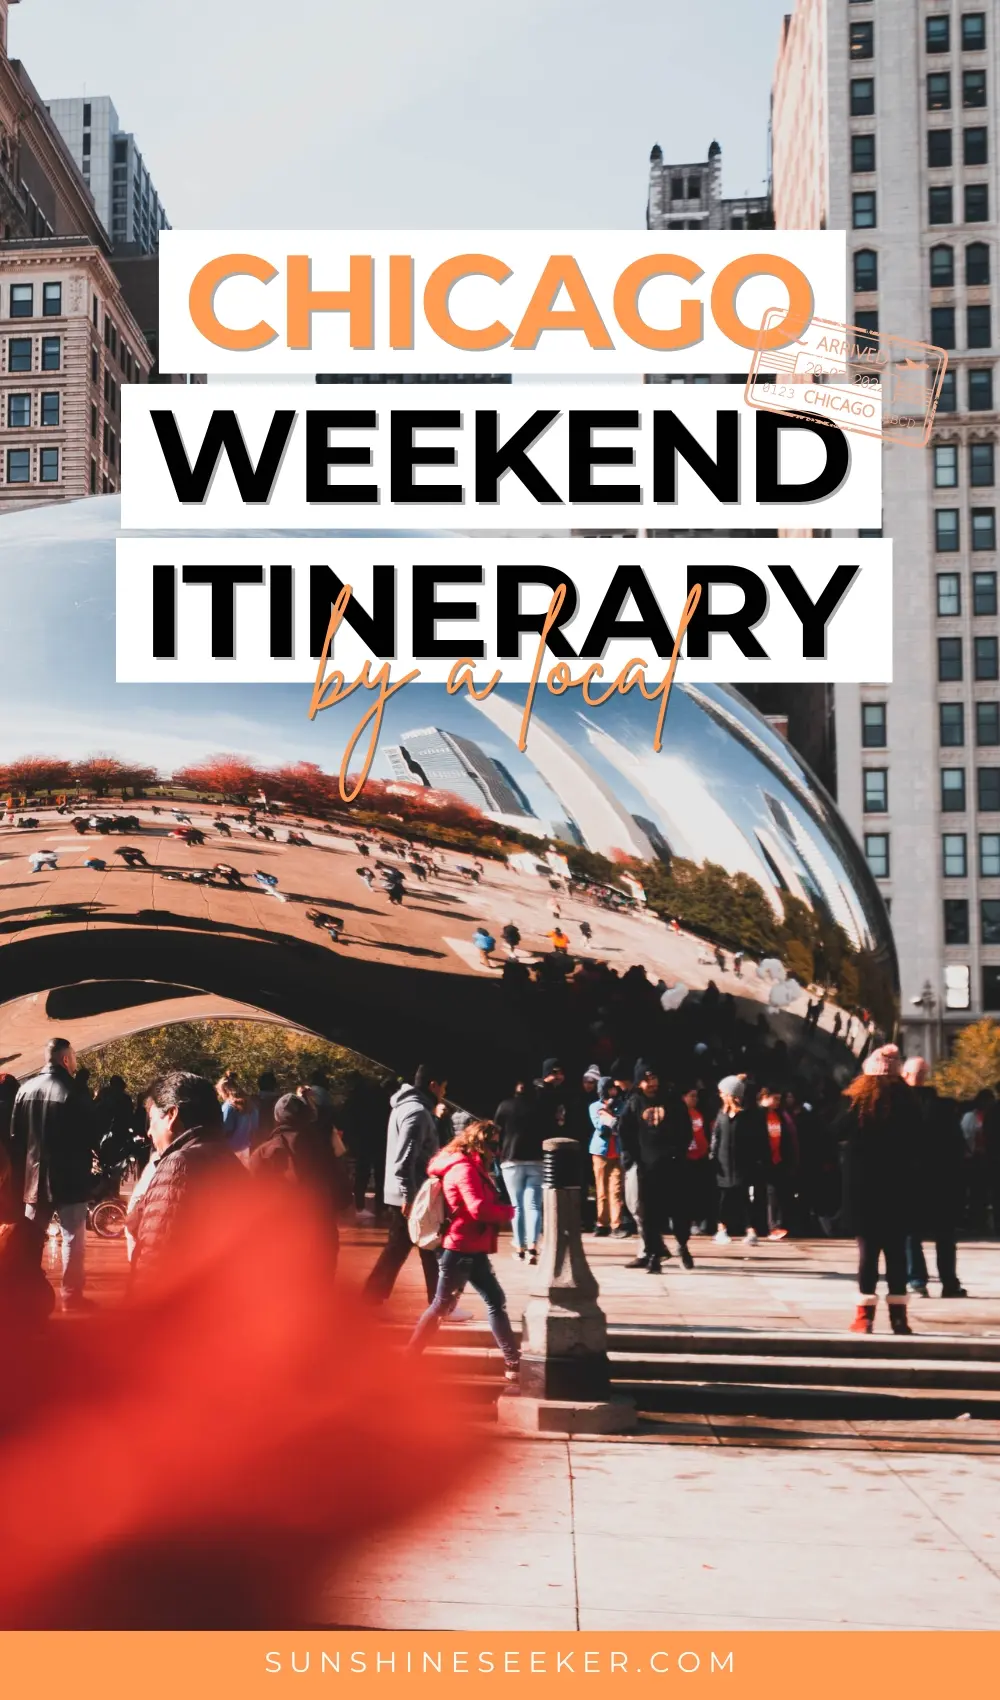 Click through for the ultimate Chicago girl's weekend itinerary. Created by a local. It includes all the best things to do in Chicago on a weekend. From the top brunch spots to rooftop bars and must-see attractions.